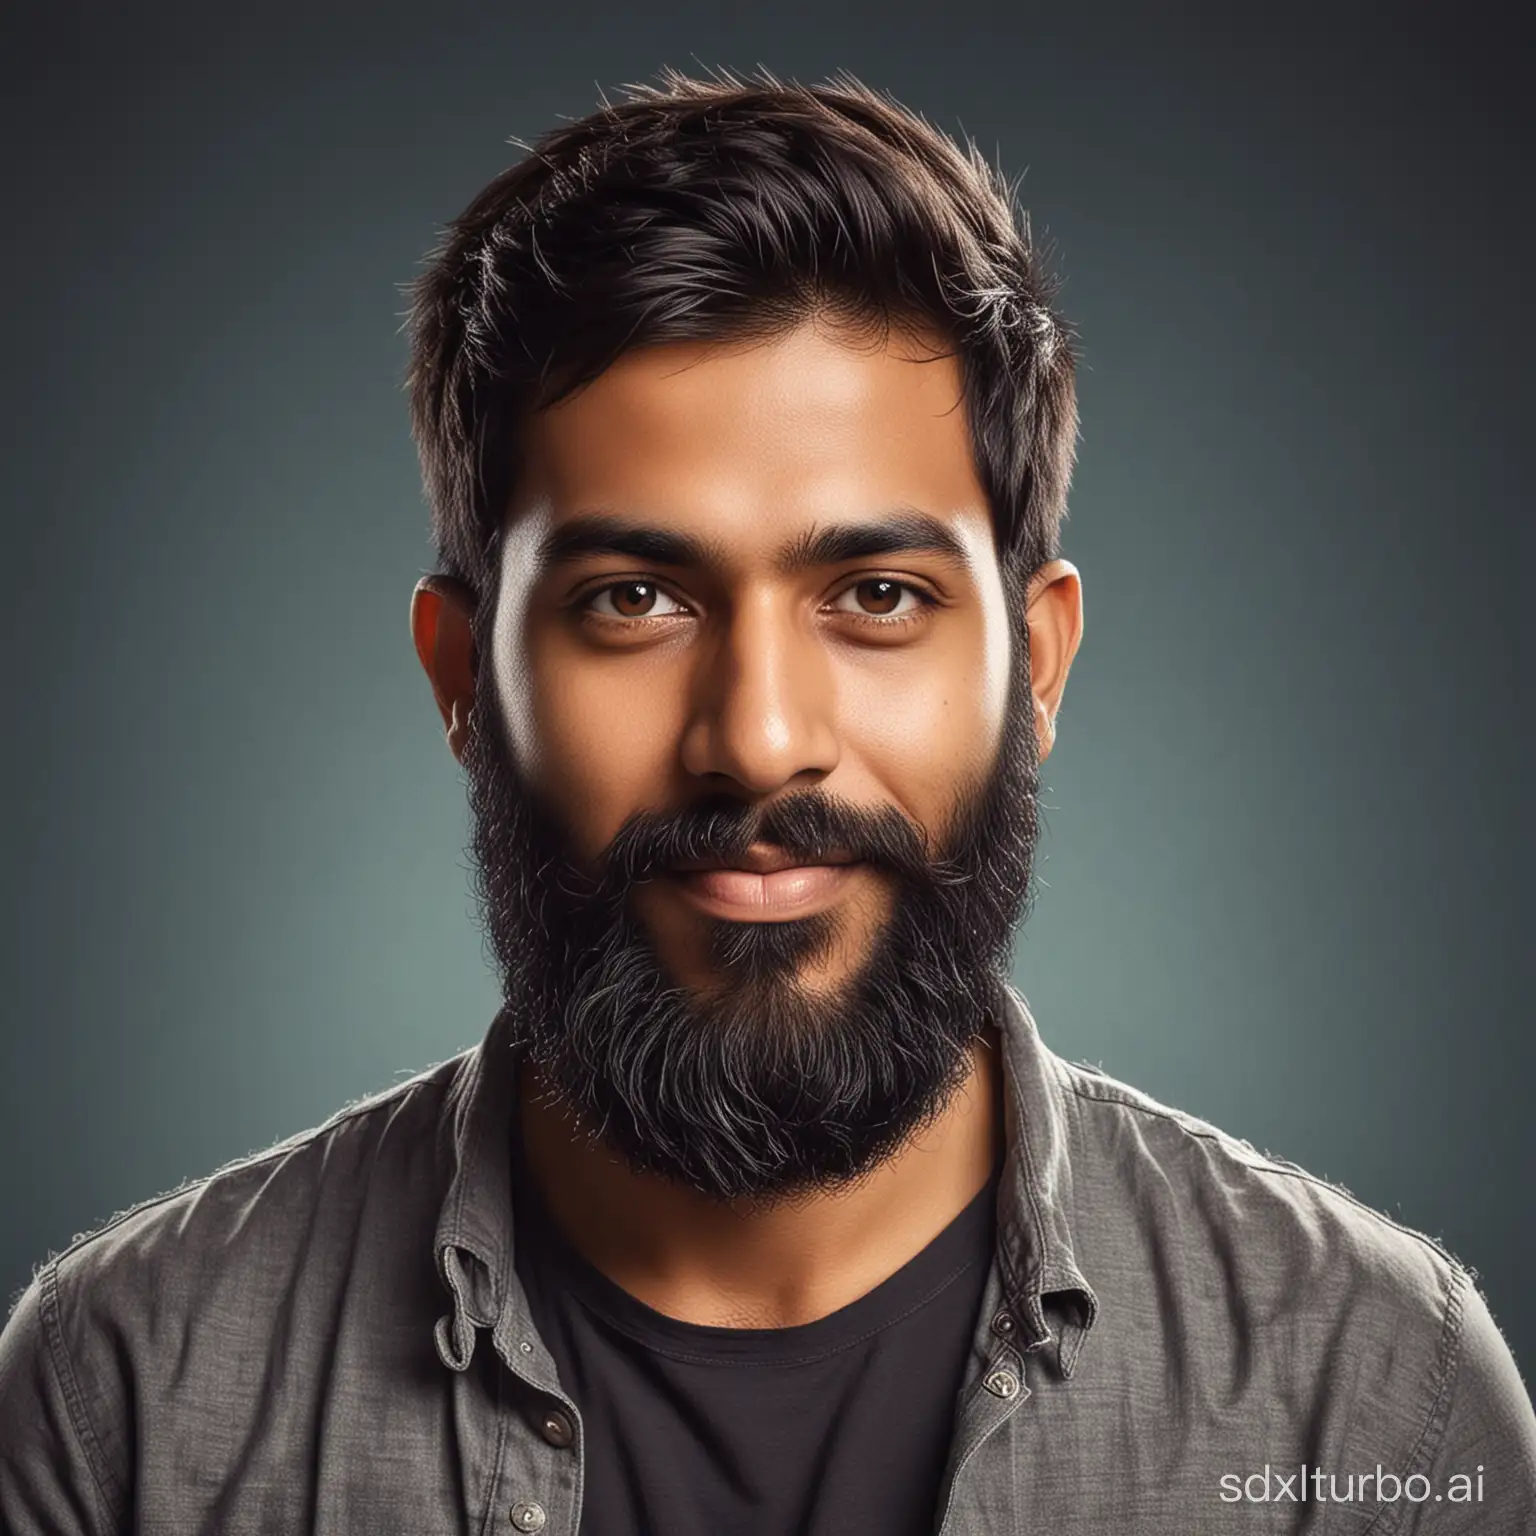 Twitter account profile pic of a bearded Indian web developer. A greeting image to attract others and gain followers. Add little texture to make it more realistic.